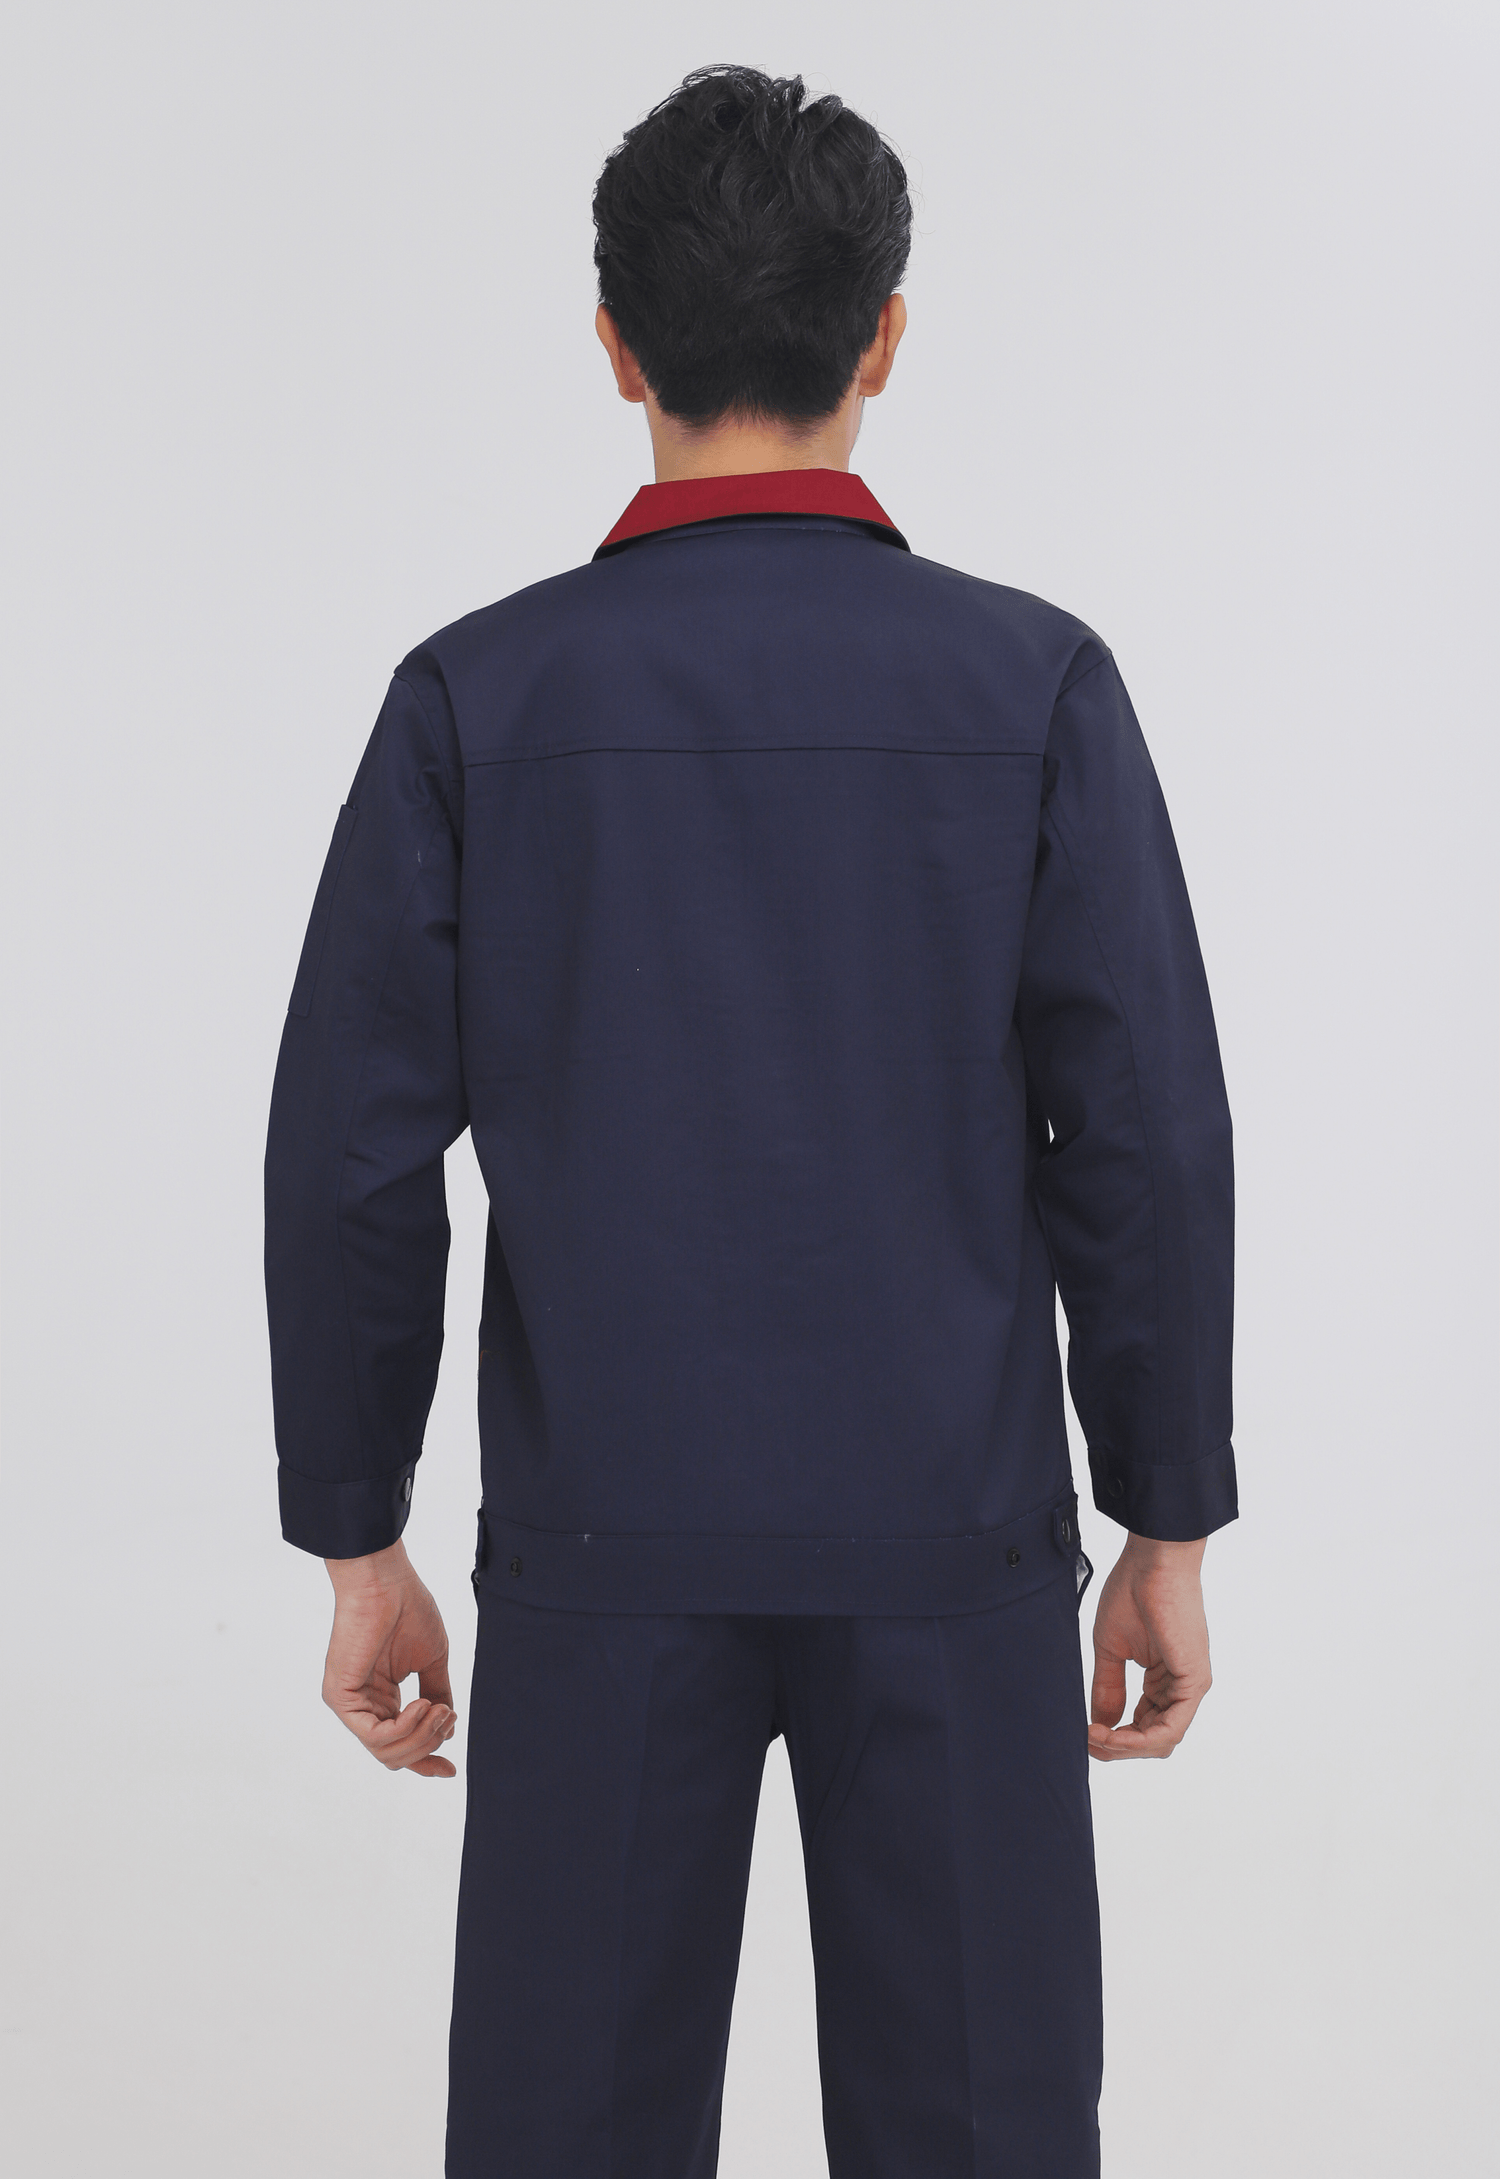 Corals Trading Co. 可樂思百貨商行 涤棉 Spring and Autumn Long Sleeve Polyester-Cotton Workwear Navy SD-W403